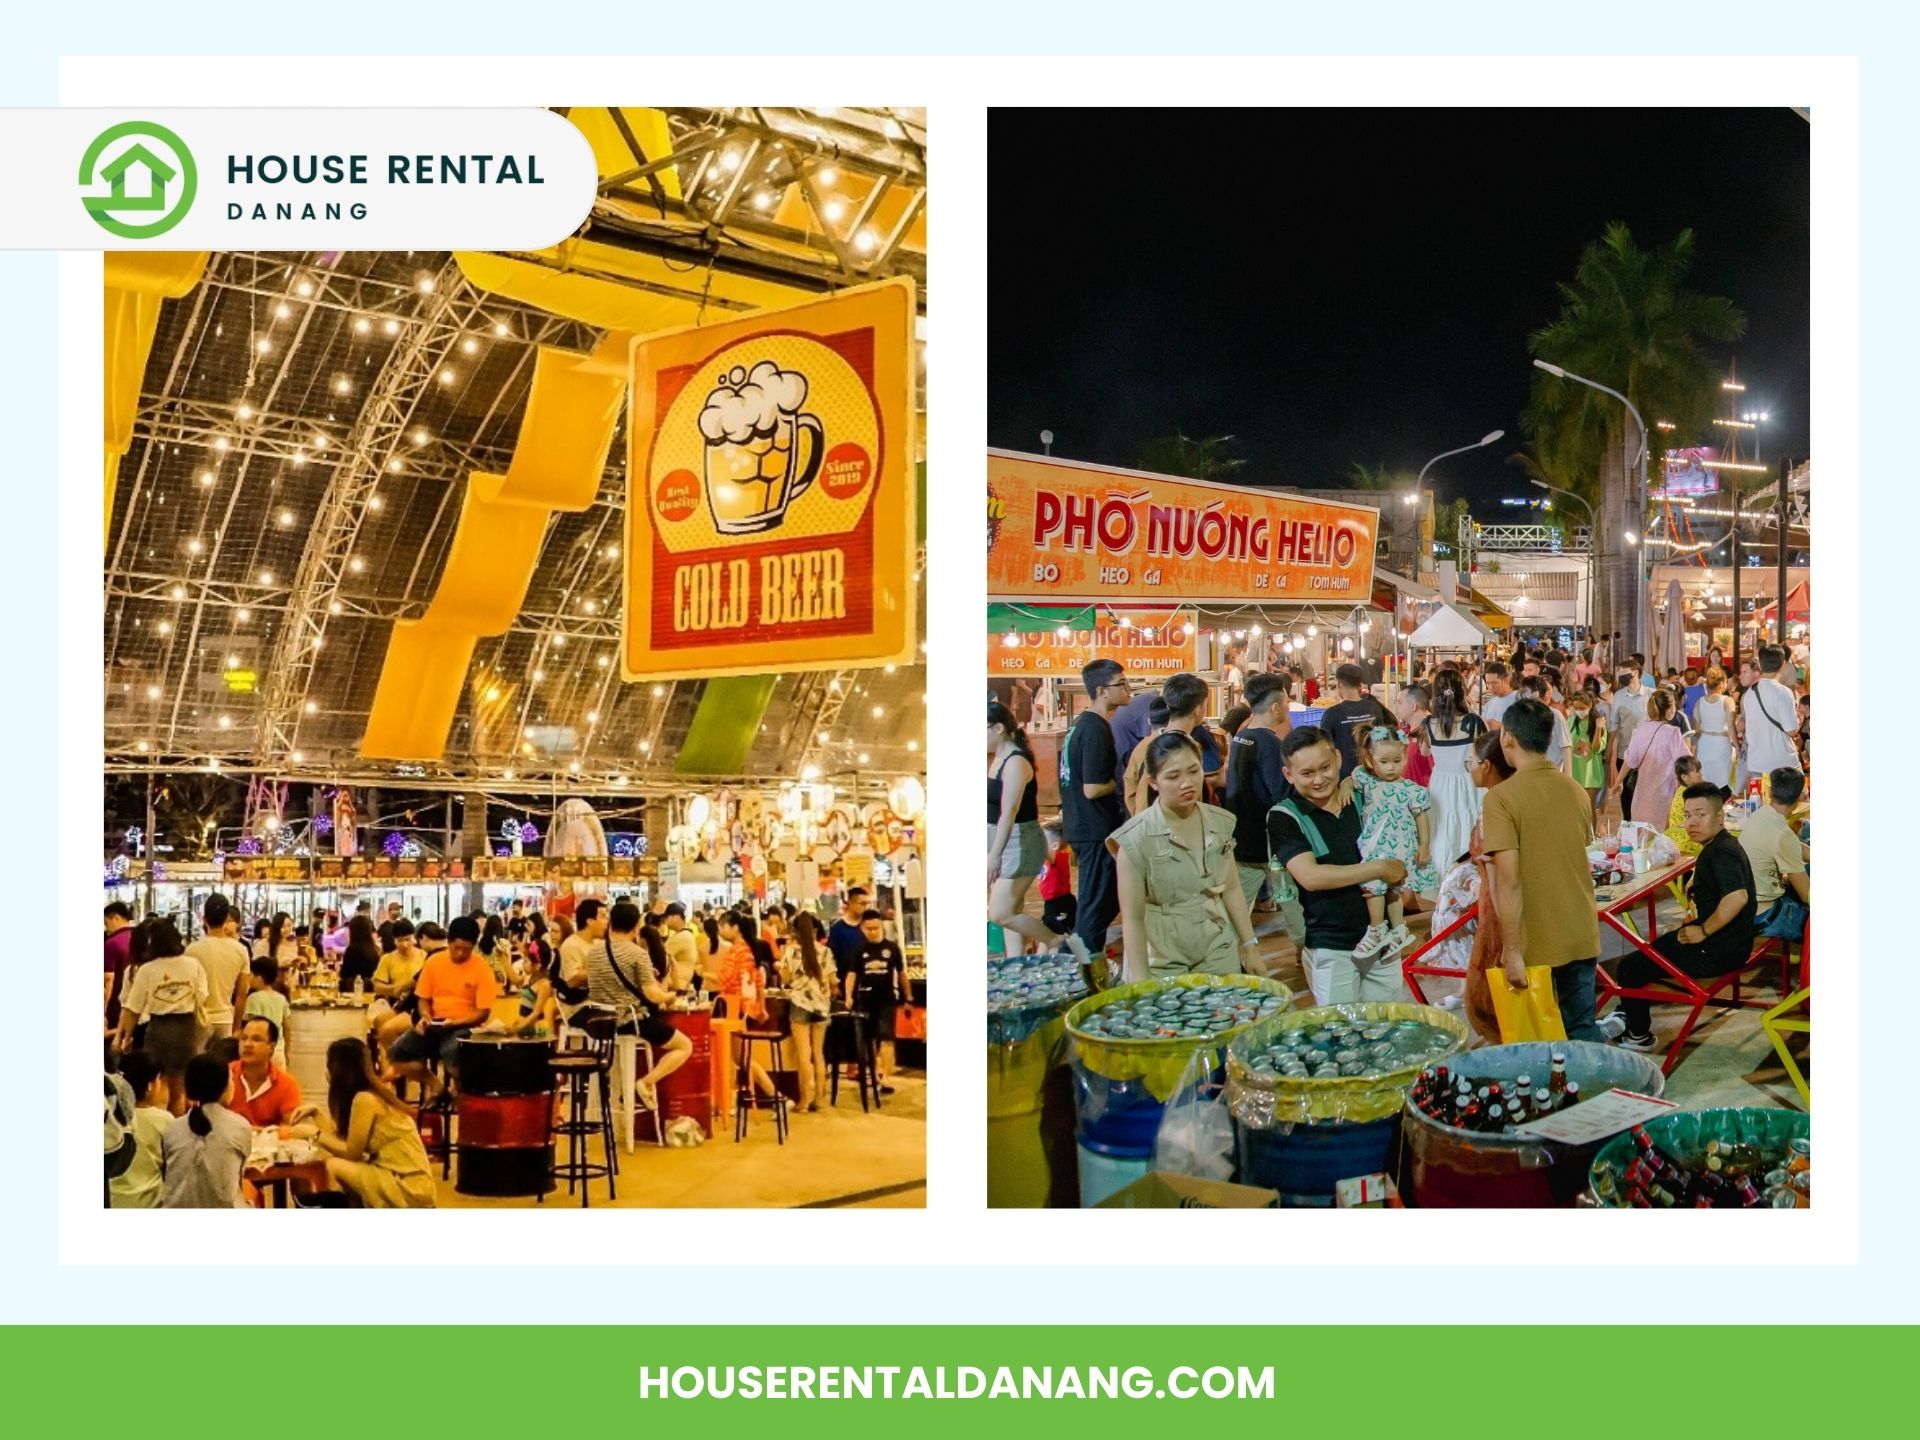         Split image: Left - Indoor seating with hanging lights and "Cold Beer" sign above tables with patrons. Right - Bustling outdoor night market in Danang with vendors and people walking among food stalls.